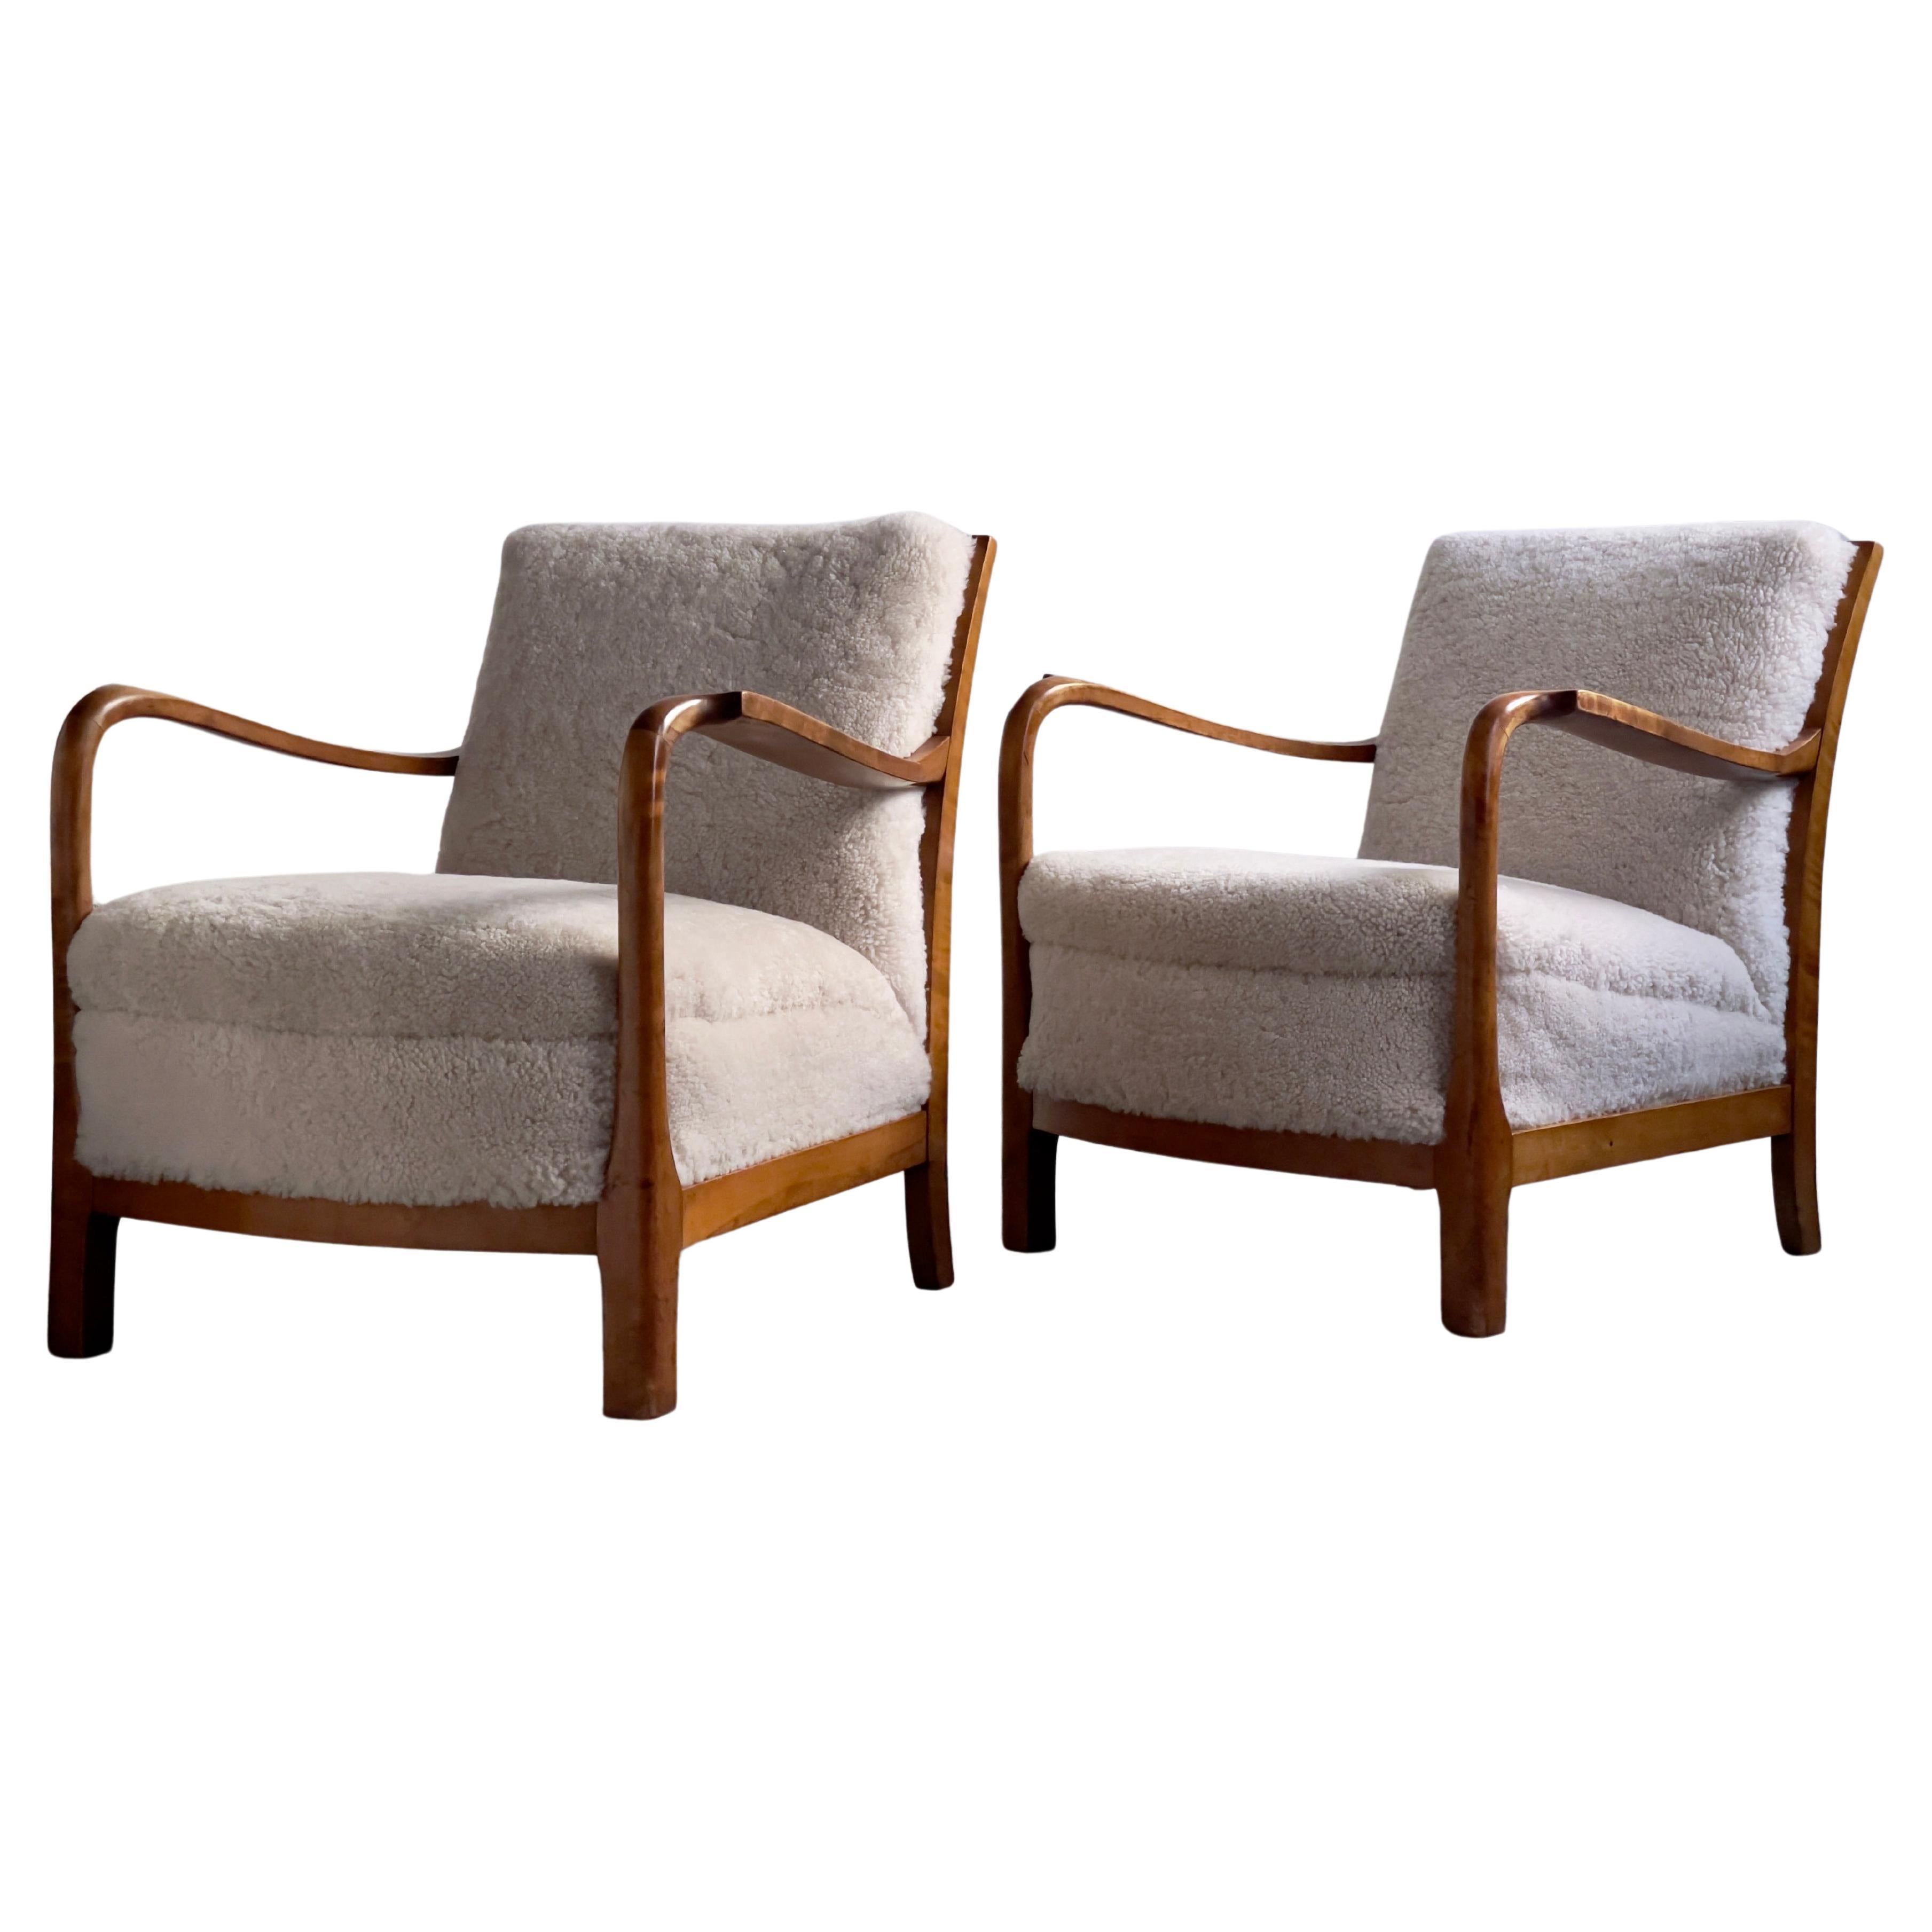 1940s pair of danish lounge chairs in solid flamed birch and premium sheepskin.